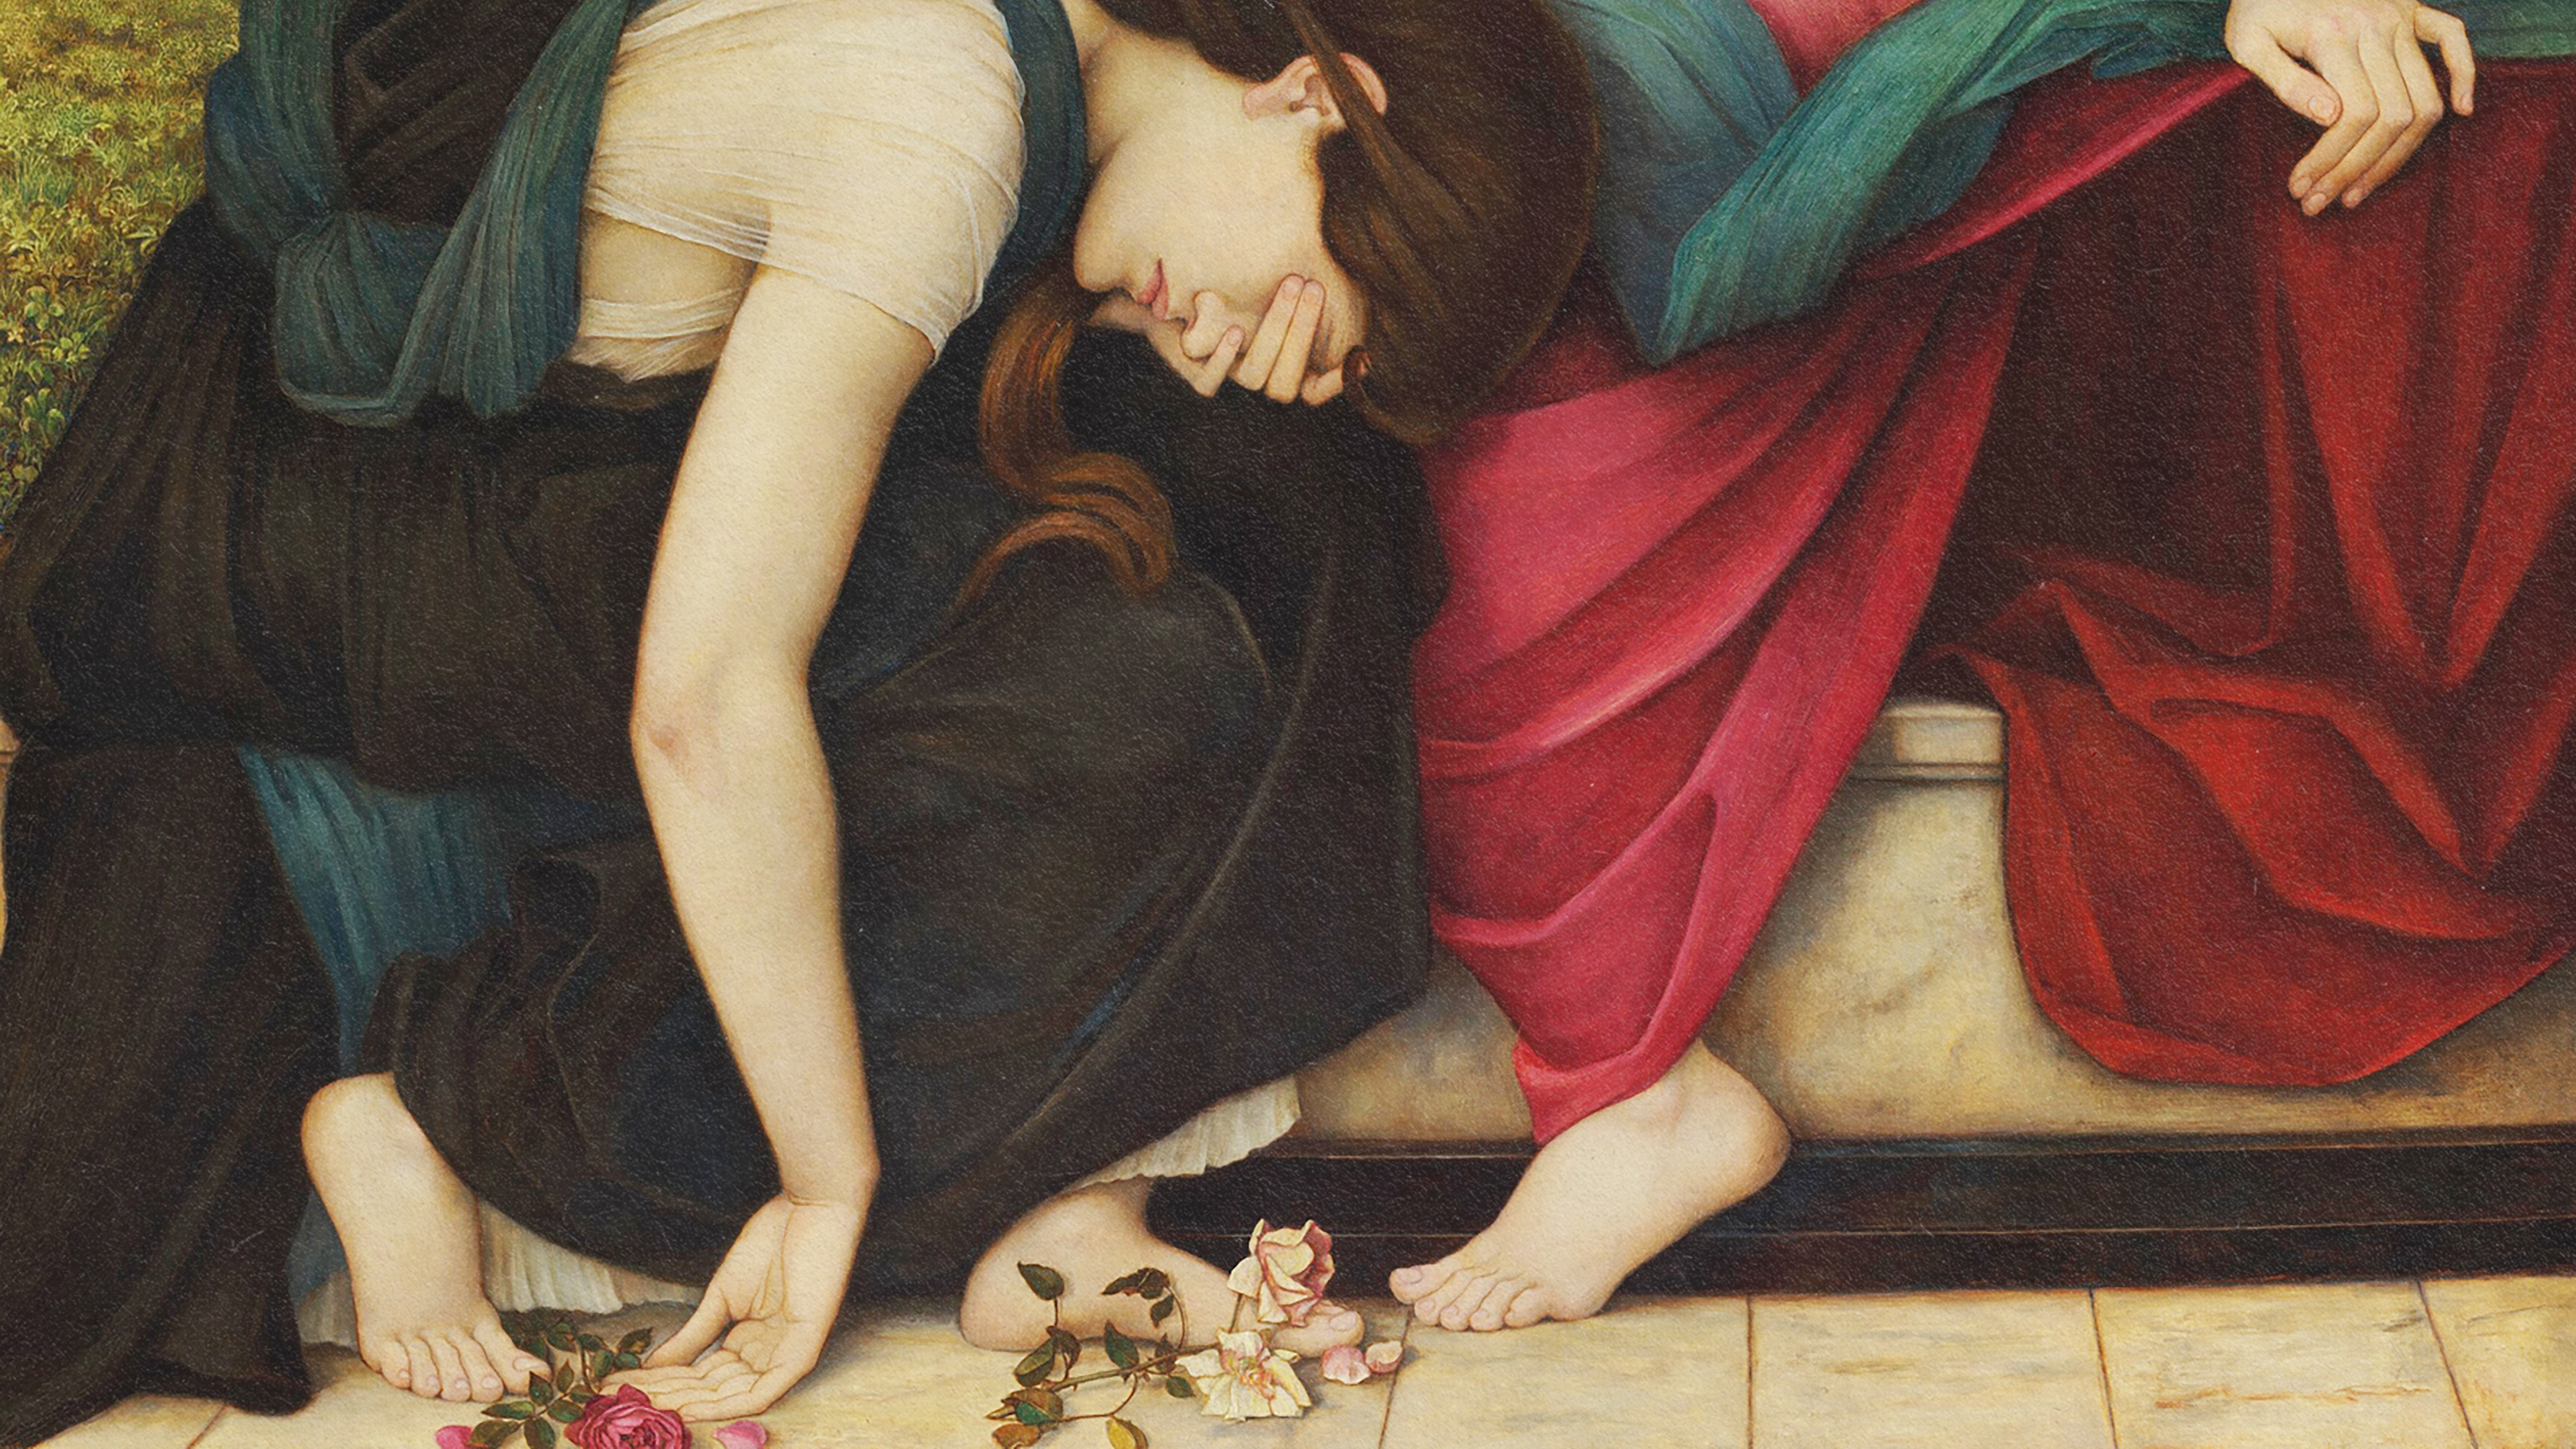 Keywords: grief, flowers
Description: A depiction of a sorrowful woman surrounded by flowers, symbolizing the stages of grief.